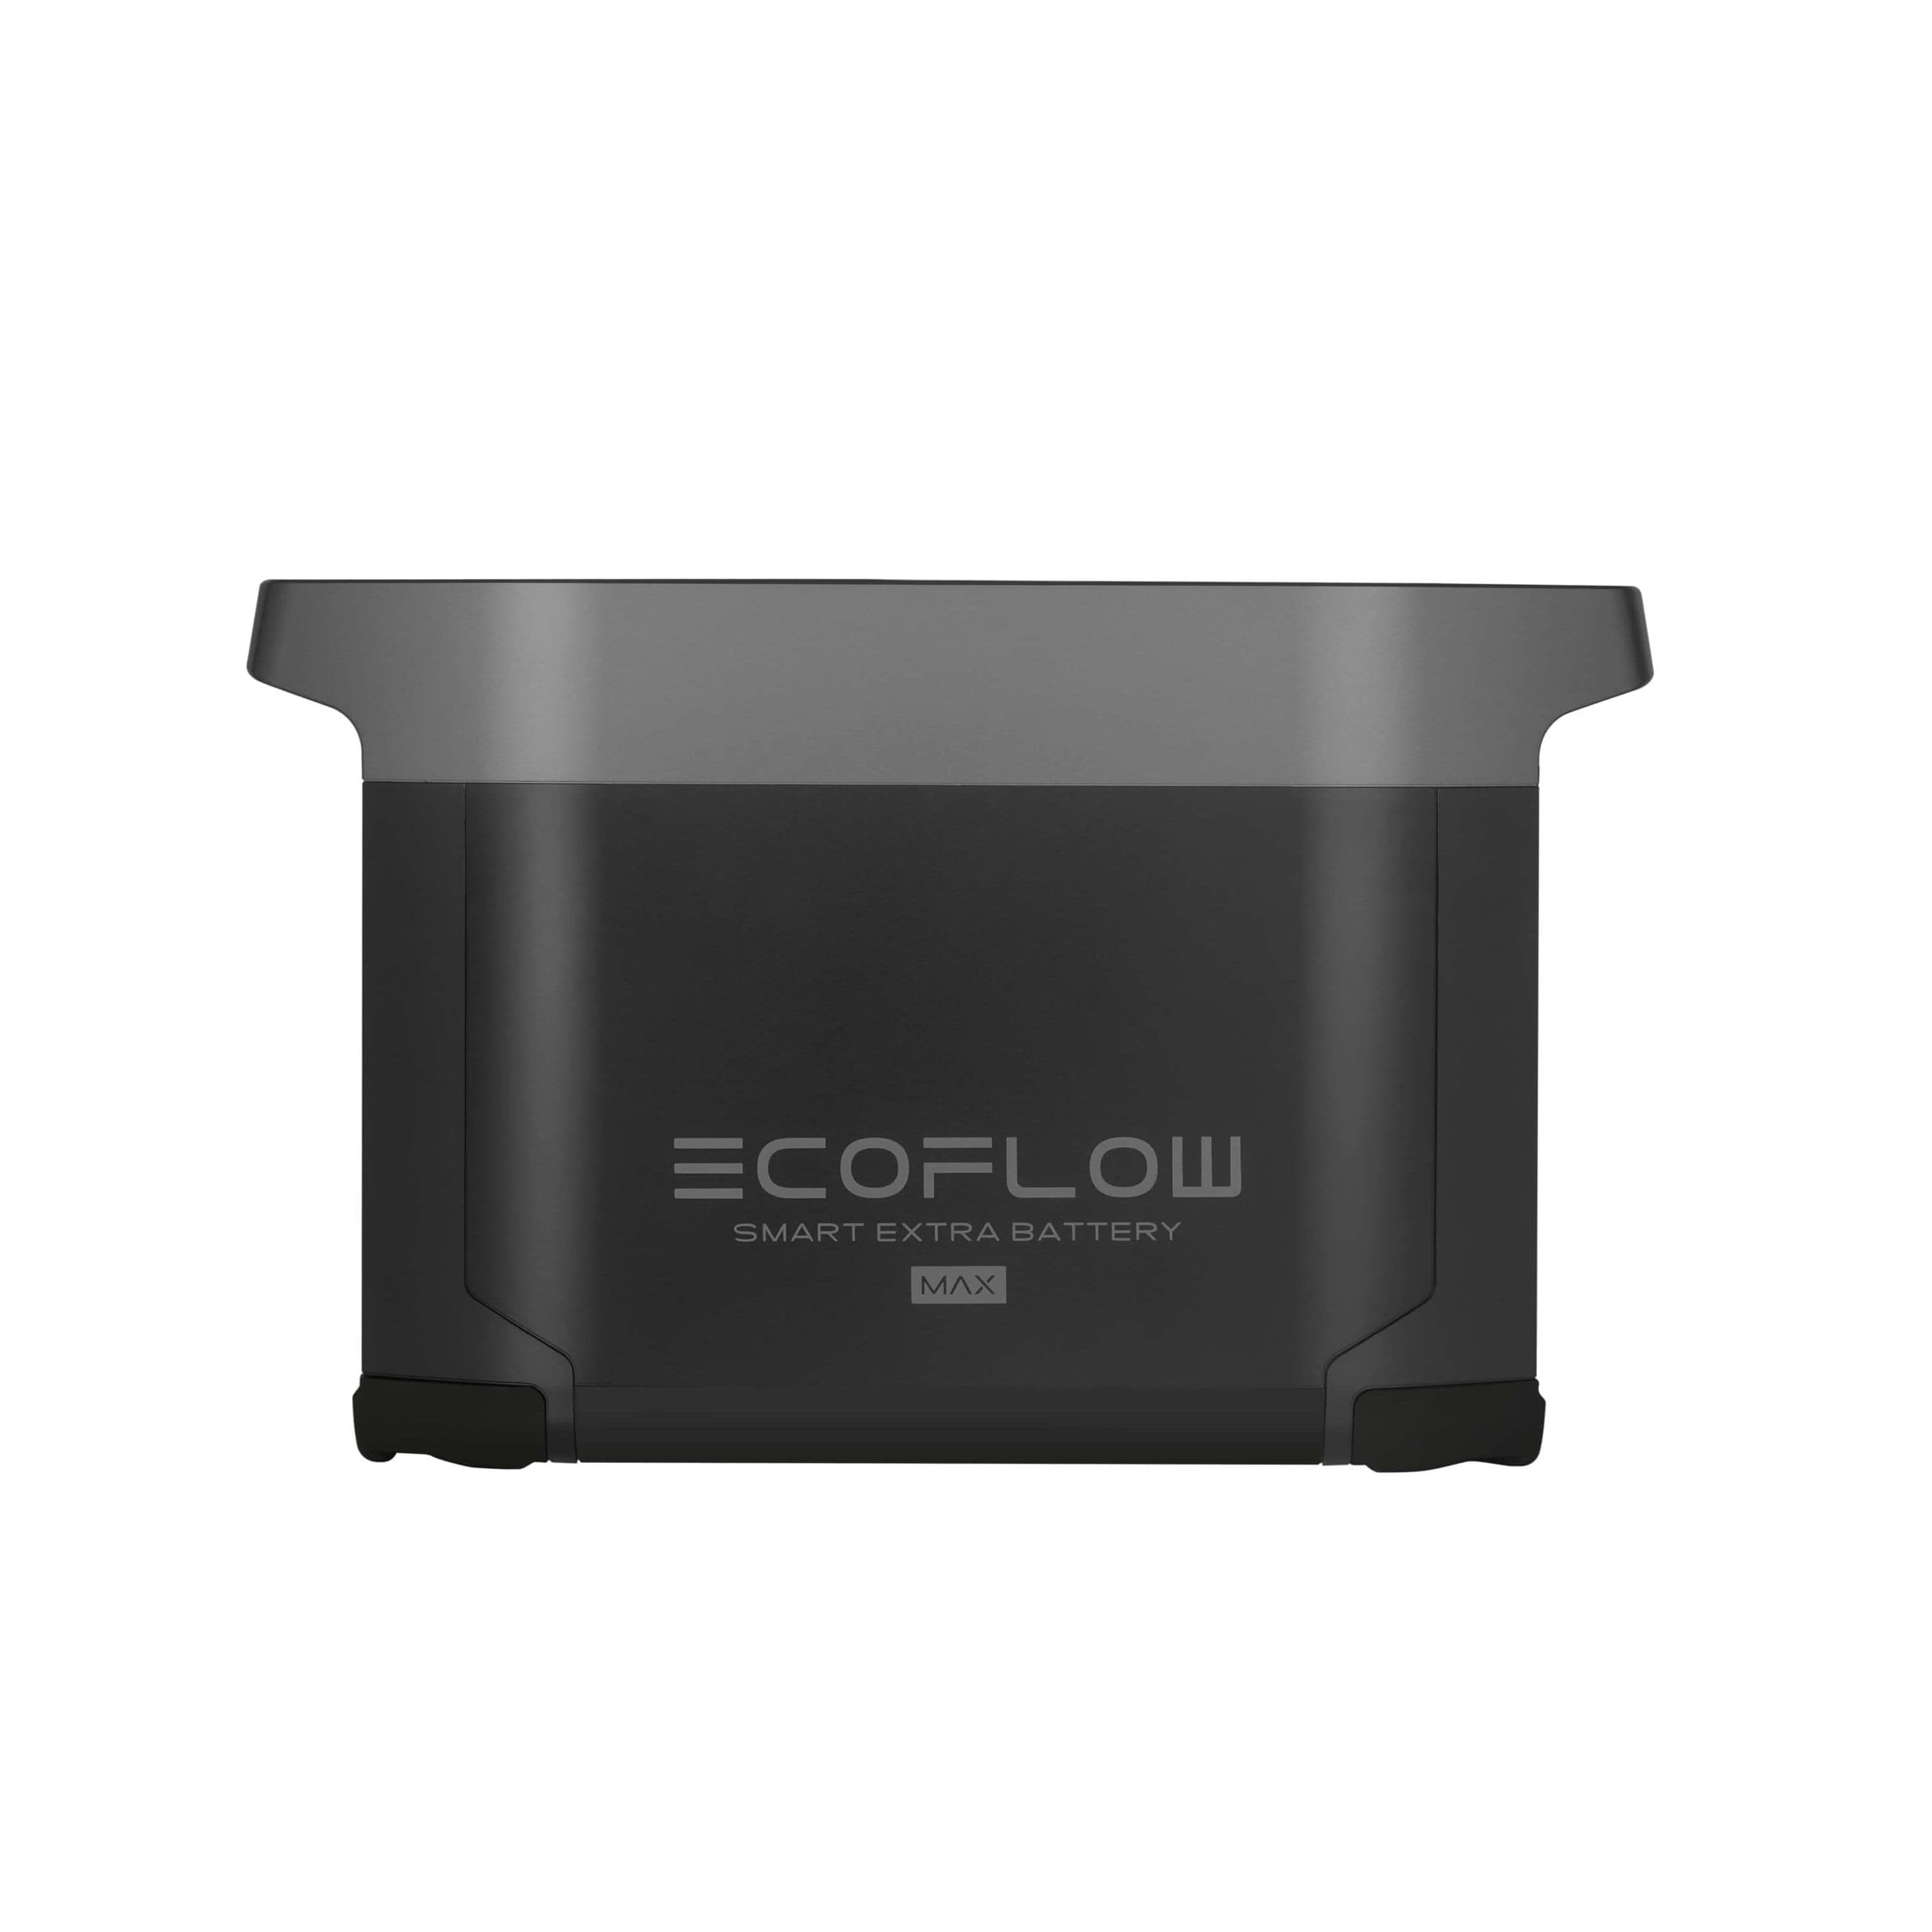 EcoFlow EcoFlow DELTA Max Smart Extra Battery (Recommended Accessory) Giving Back